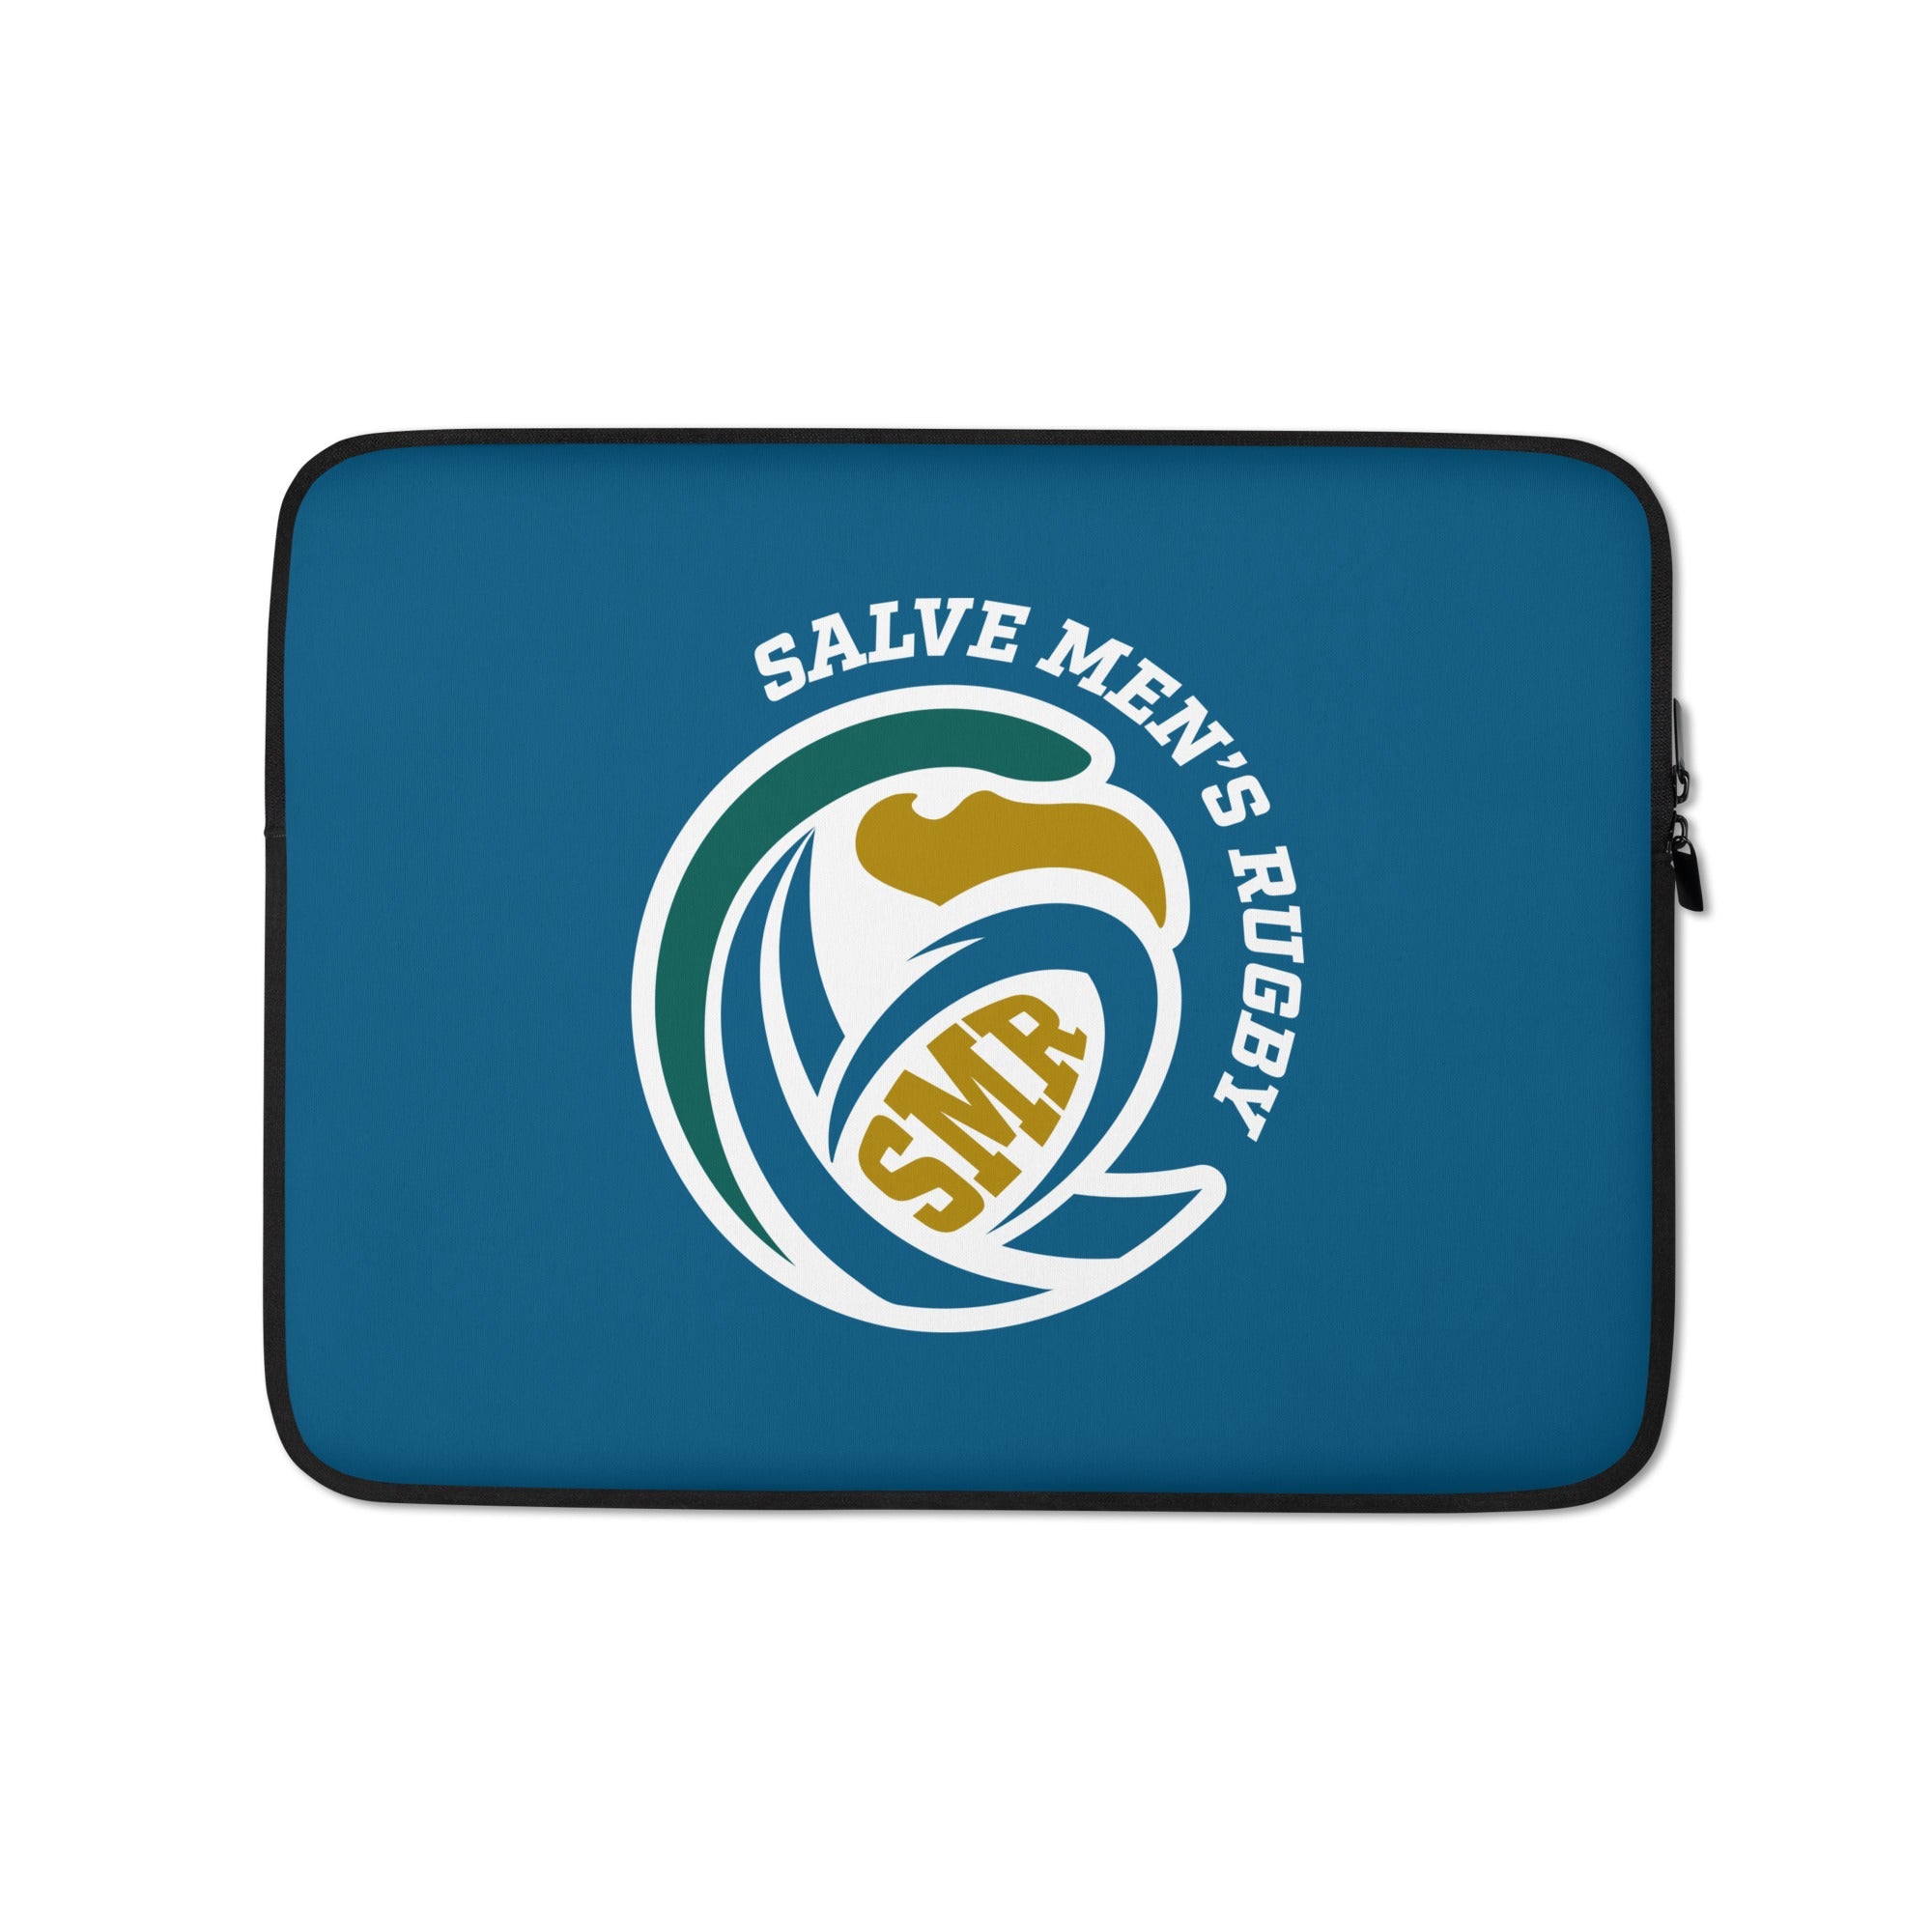 Rugby Imports Salve Men's Rugby Laptop Sleeve